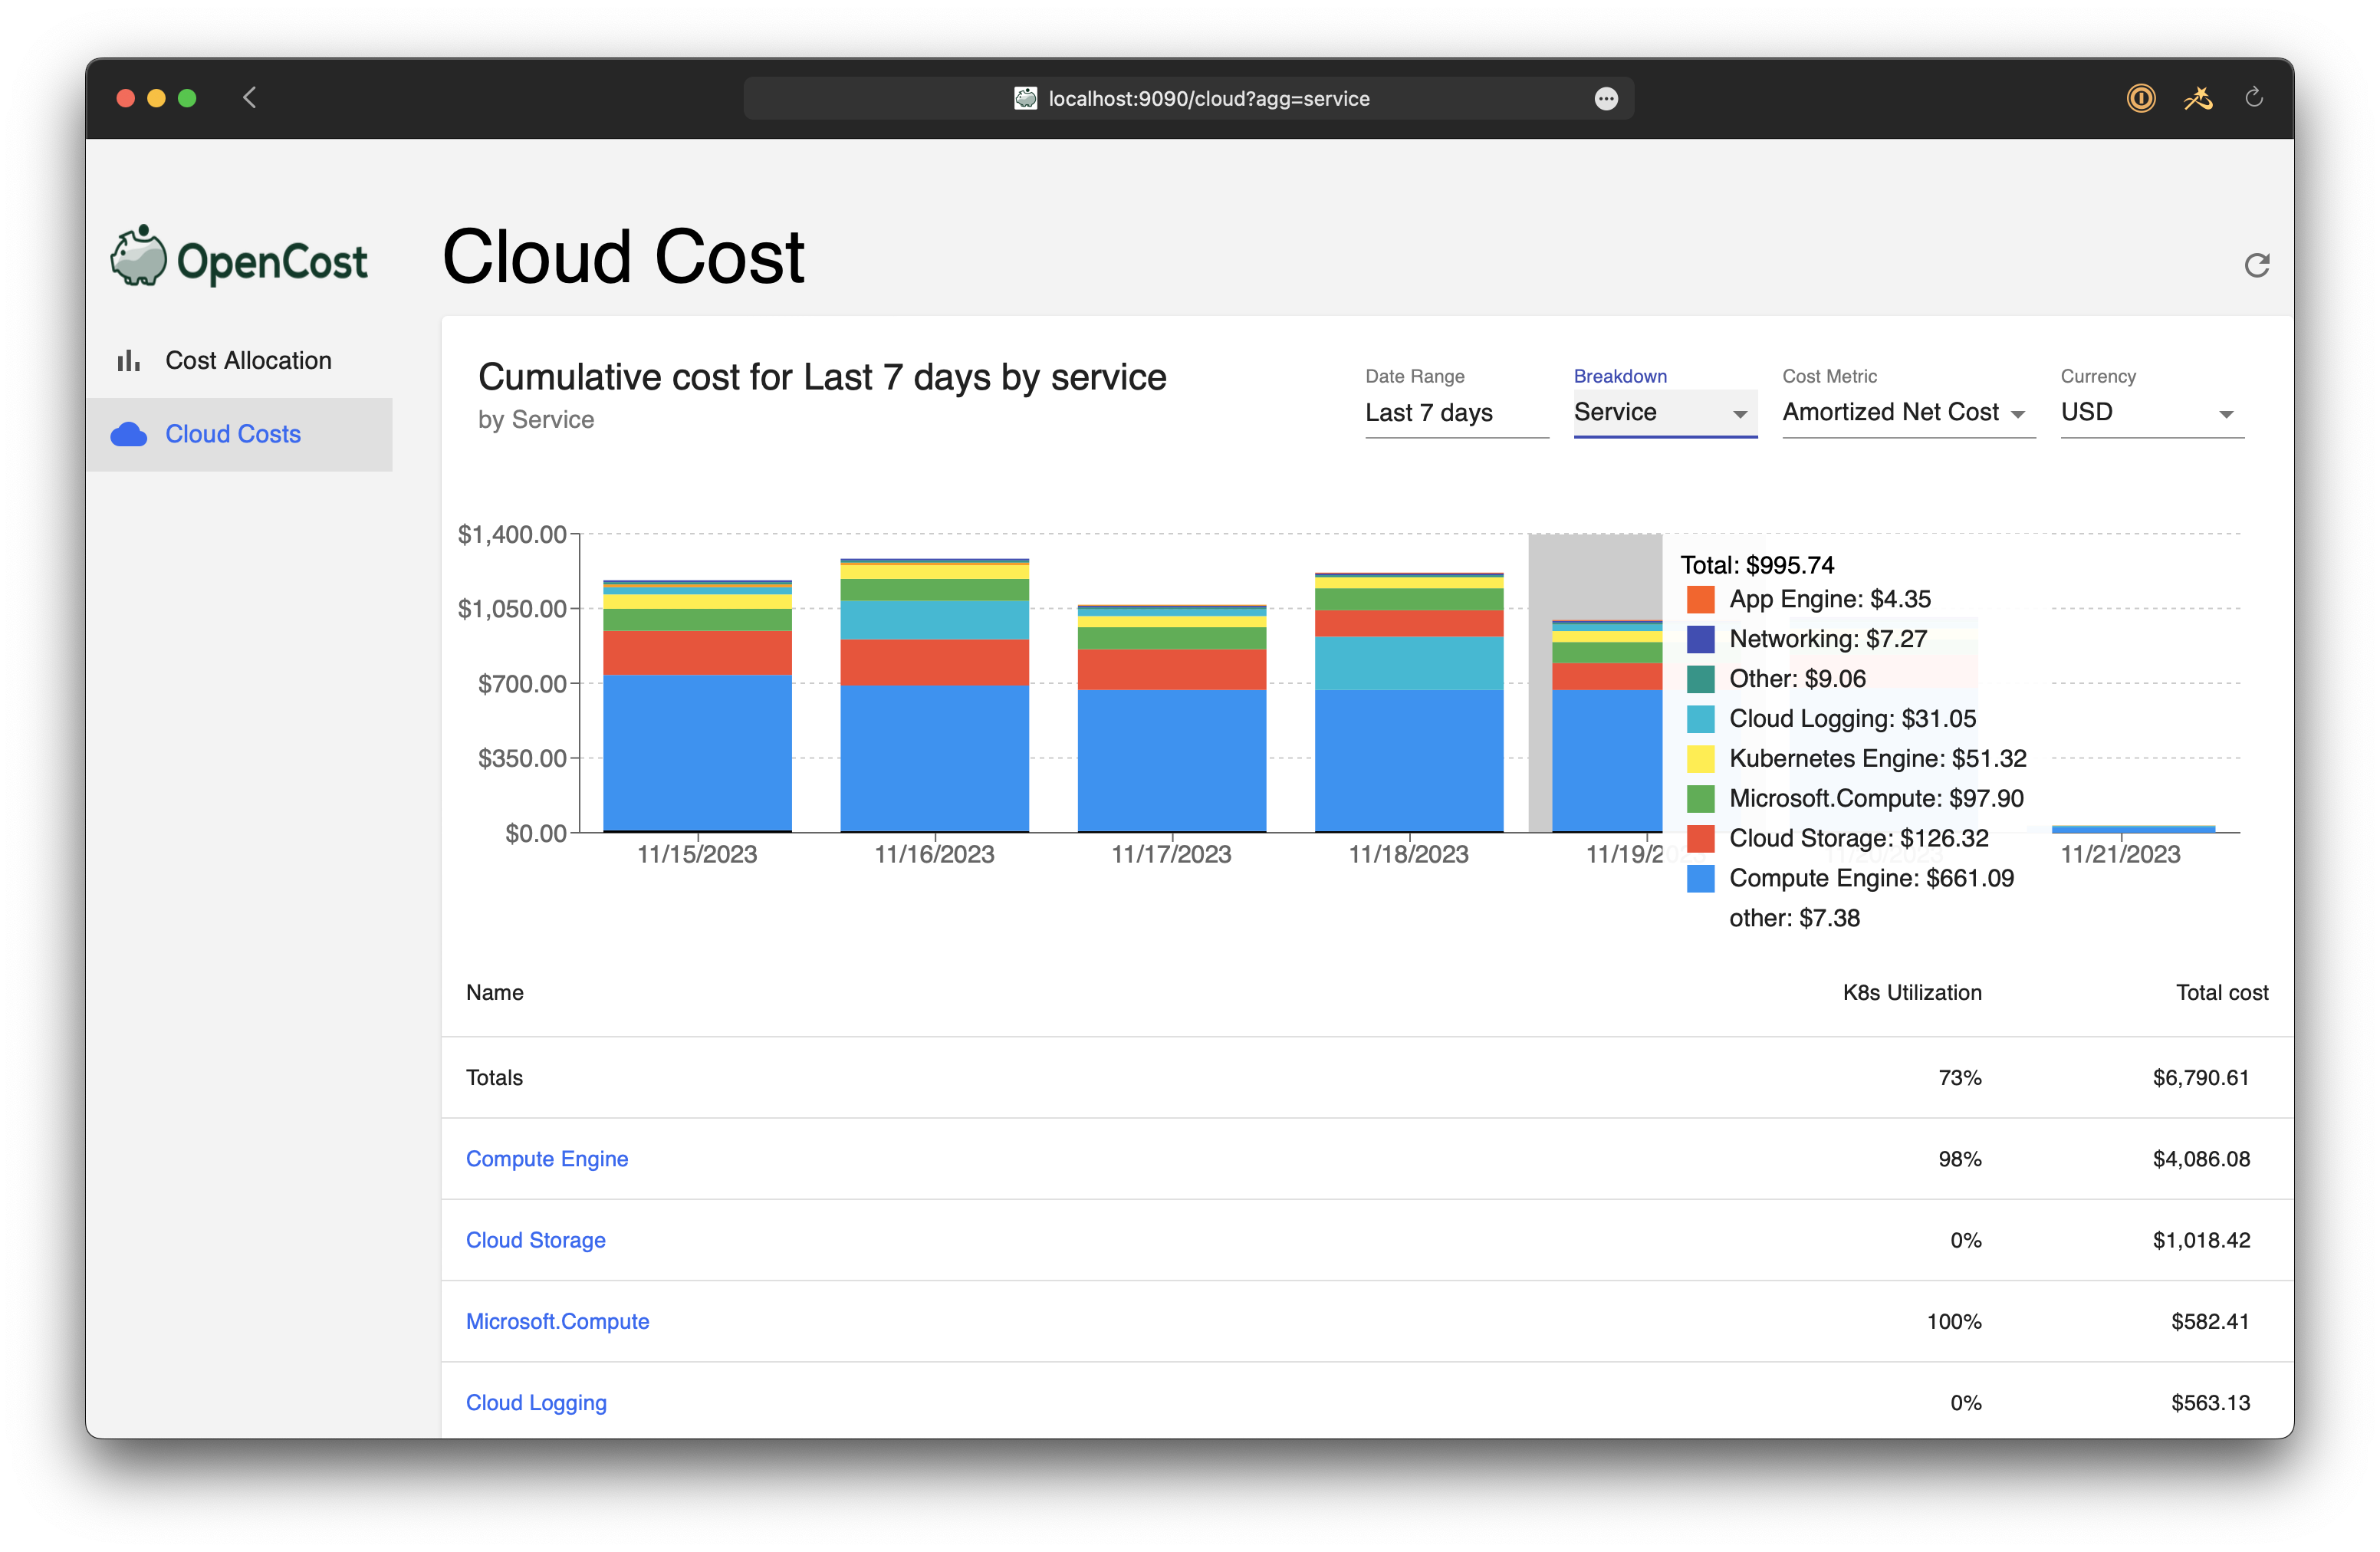 OpenCost Cloud Costs